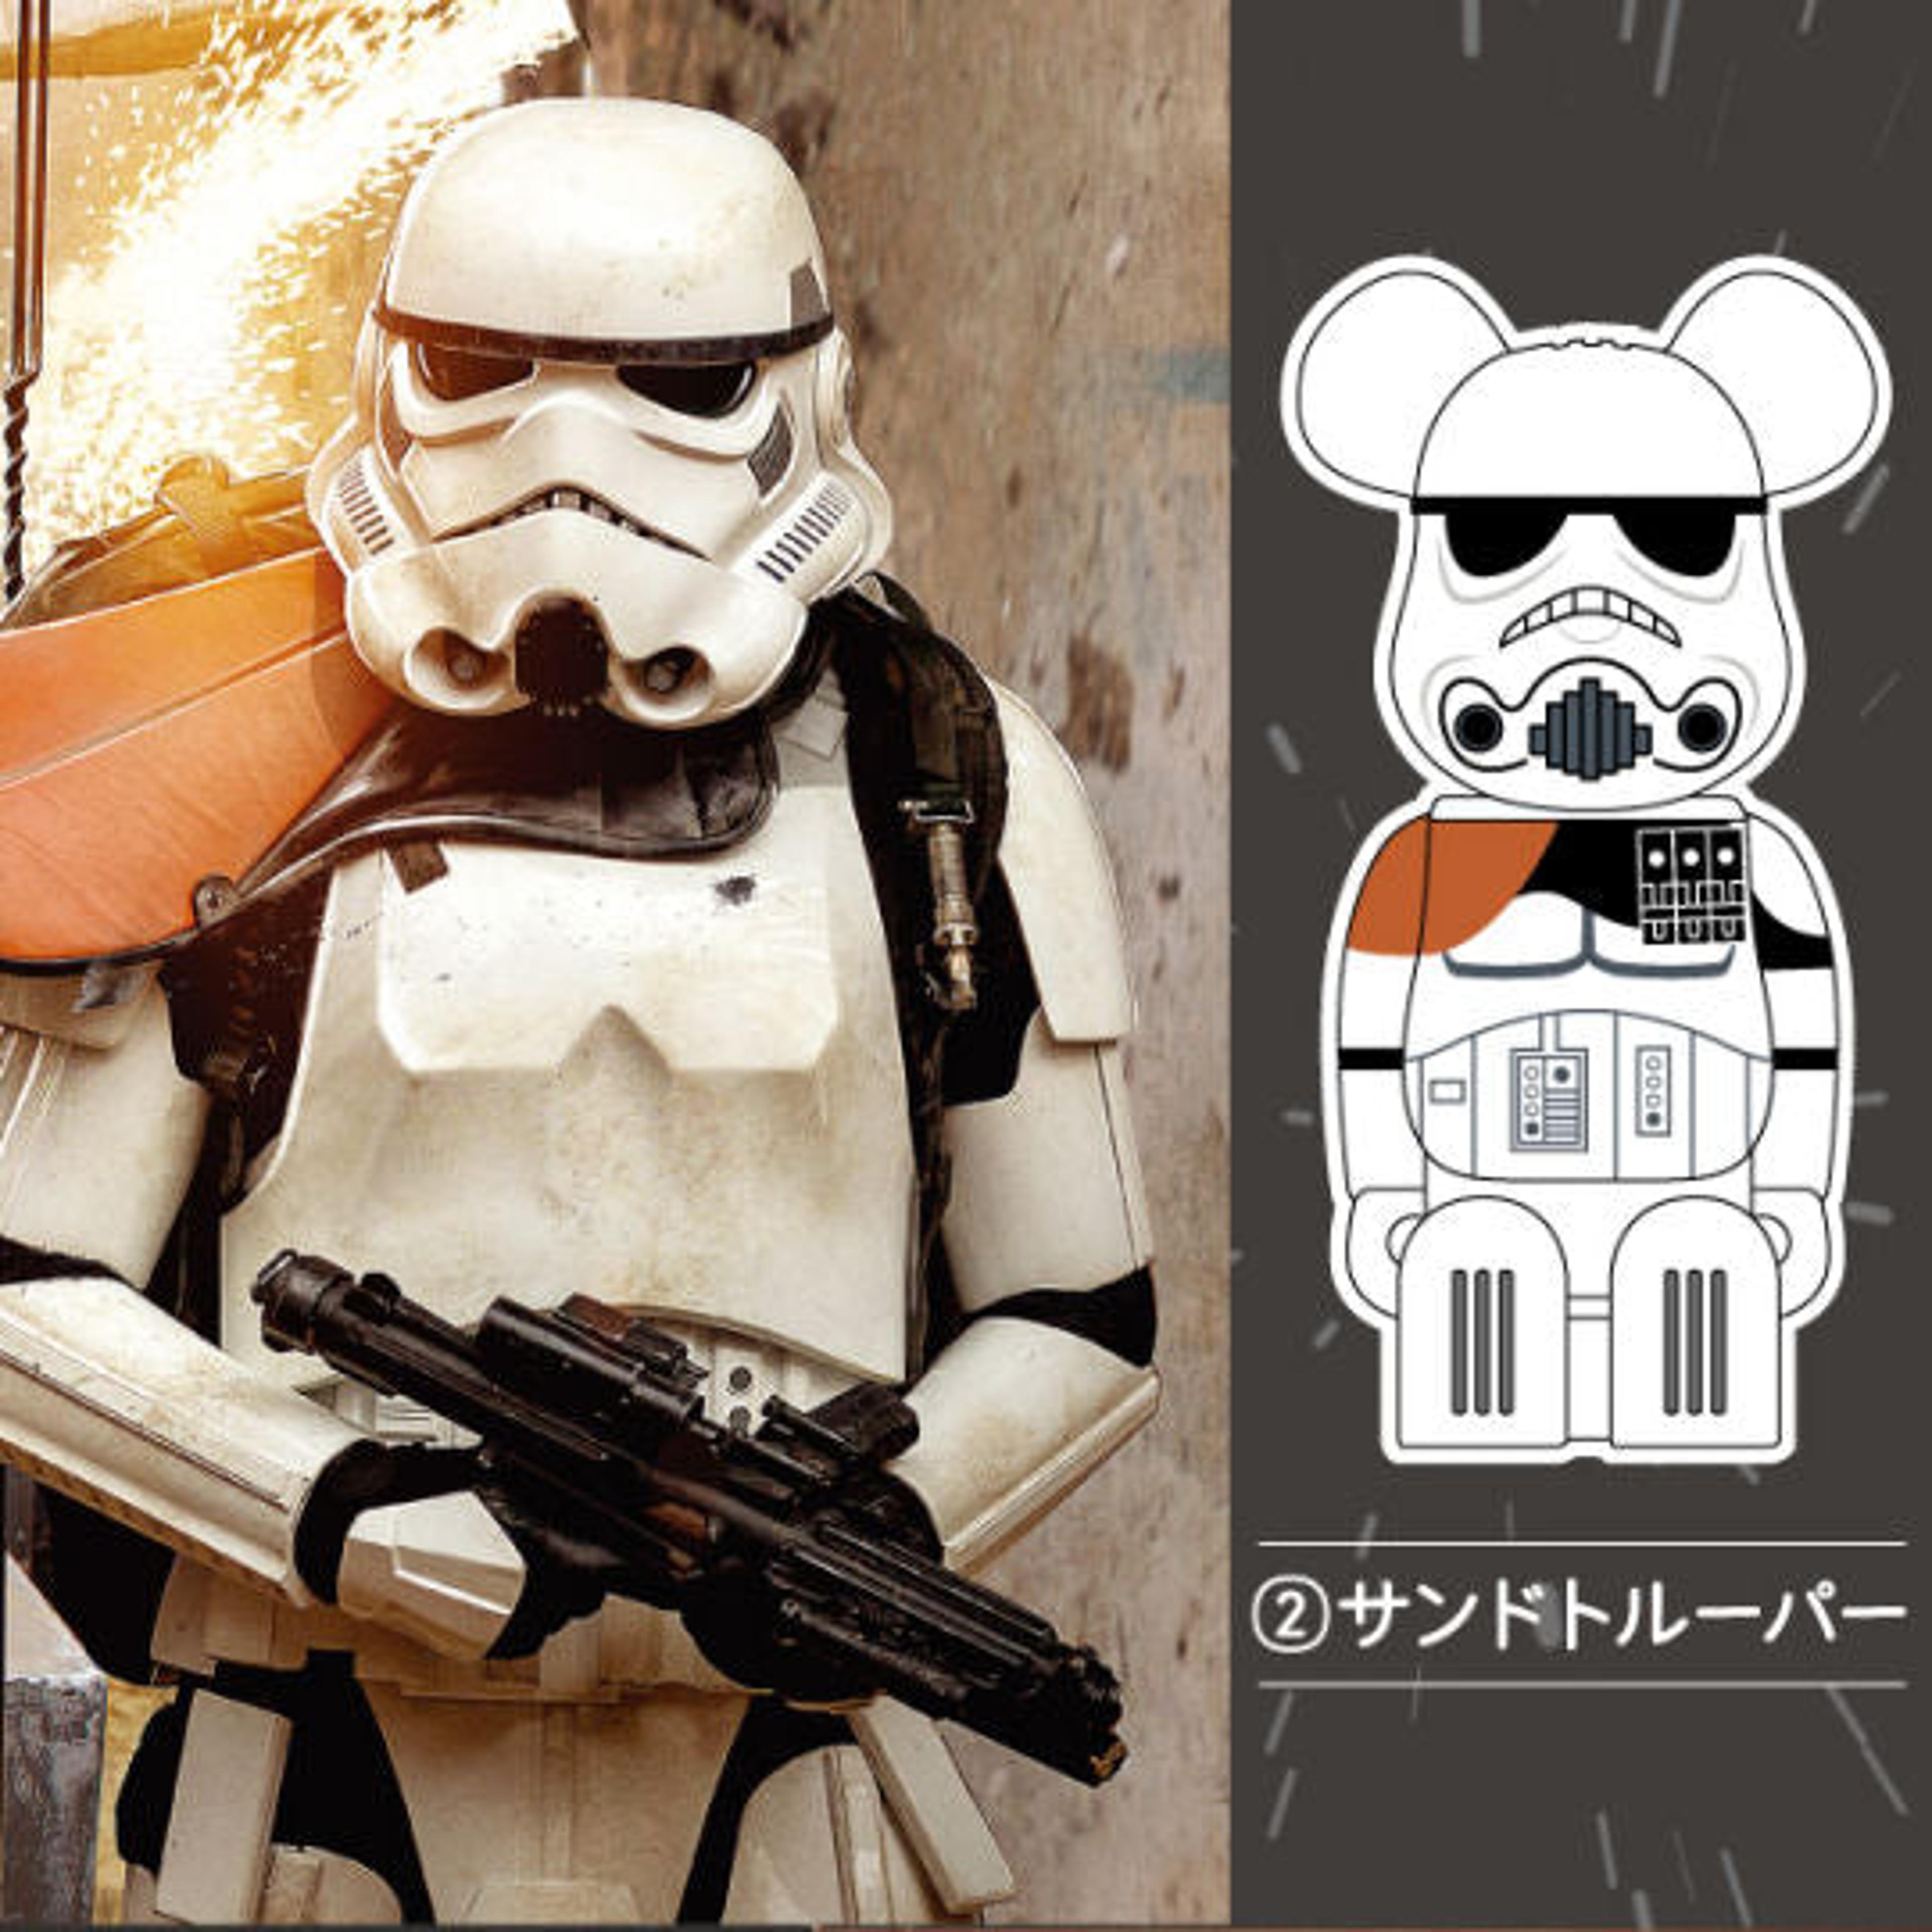 Alternate View 2 of Medicom Toy BE＠RBRICK Cleverin Star Wars 6 Piece Compete Set L